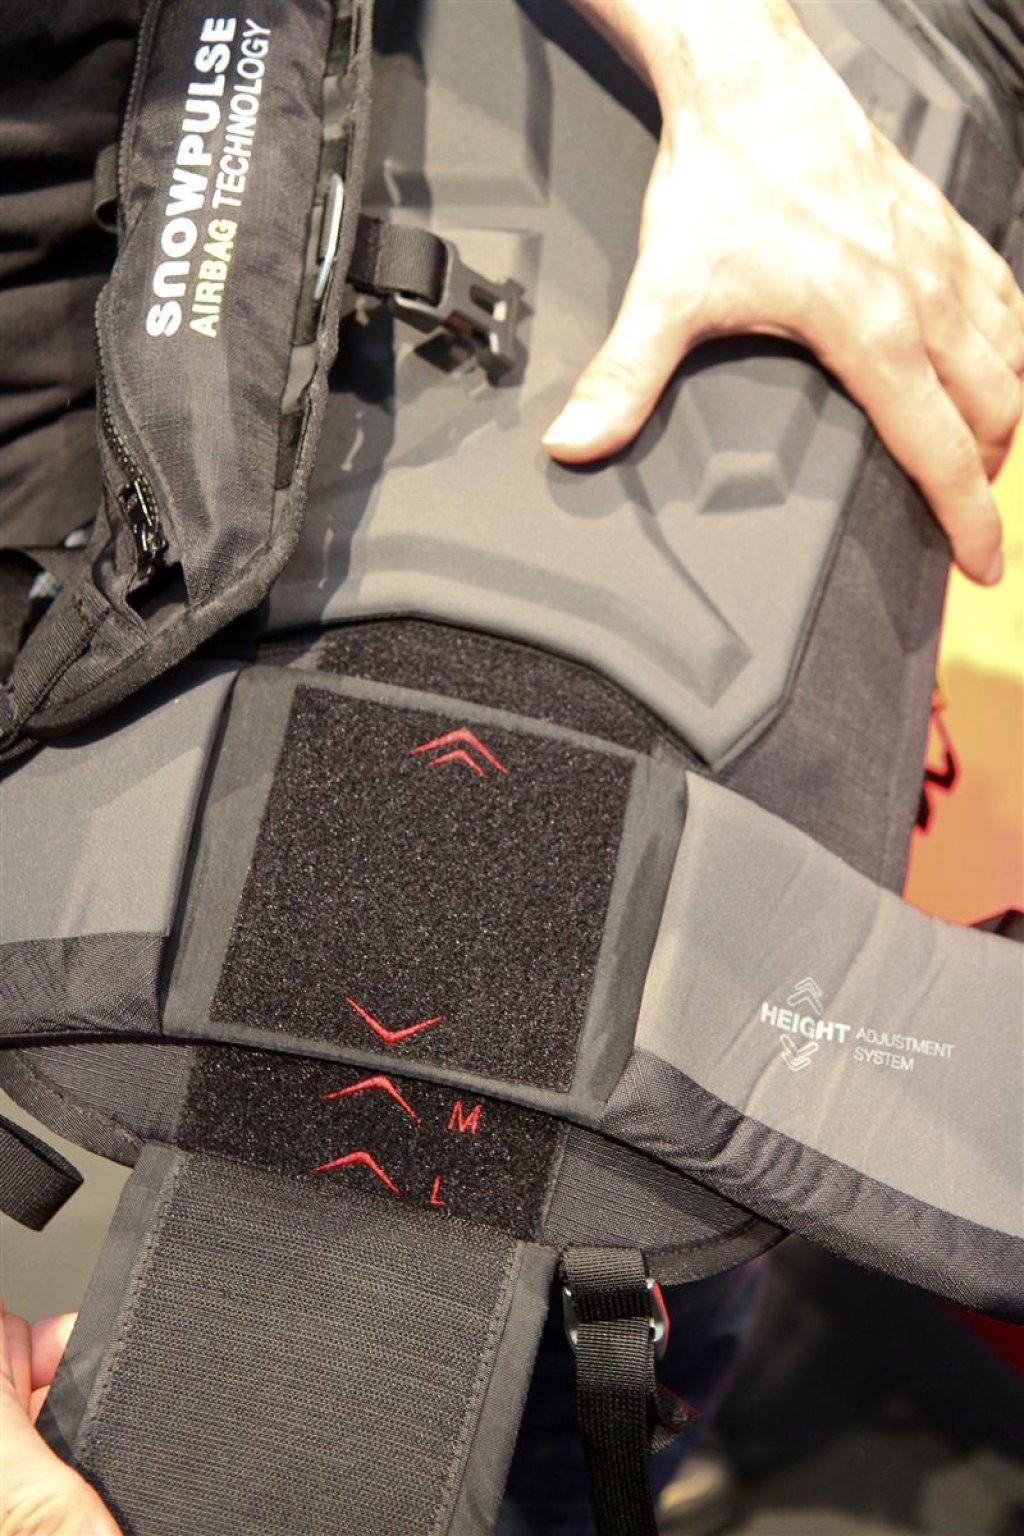 The four new P.A.S. systems only have one back length, but they are individually adjustable.